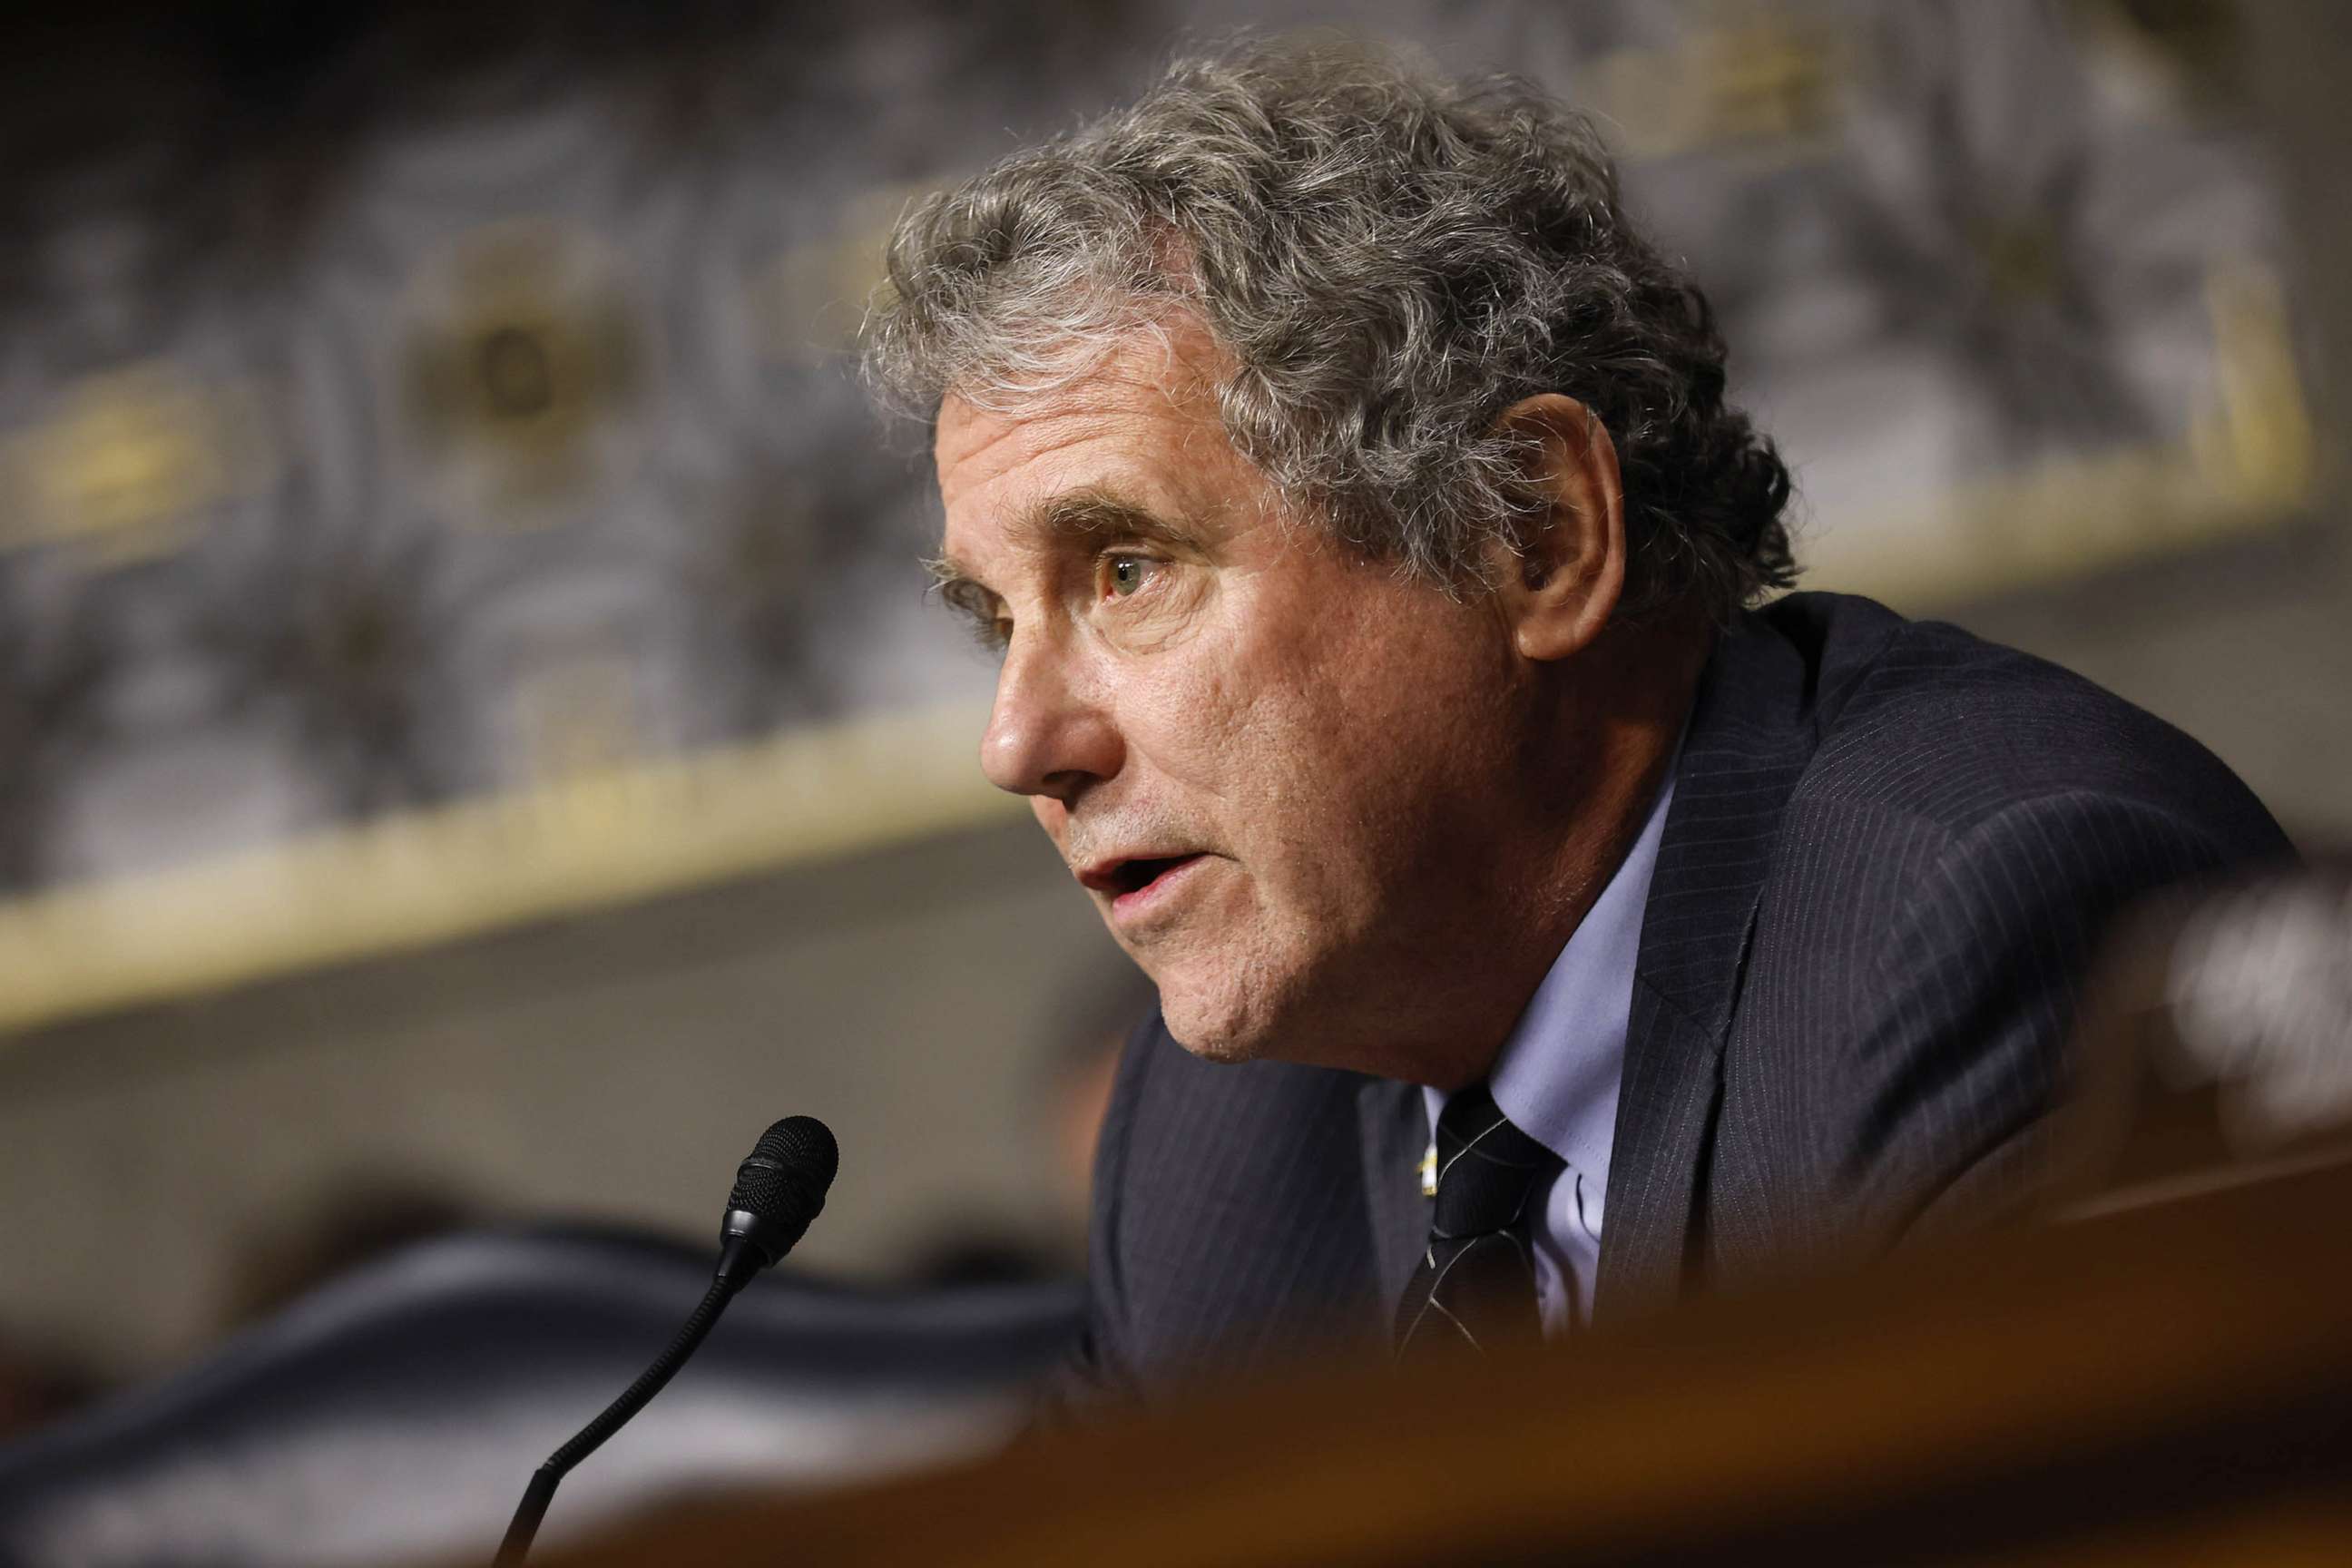 PHOTO: In this Dec. 1, 2022, file photo, Senator Sherrod Brown speaks during a Senate Agriculture, Nutrition and Forestry Committee hearing in Washington, D.C.